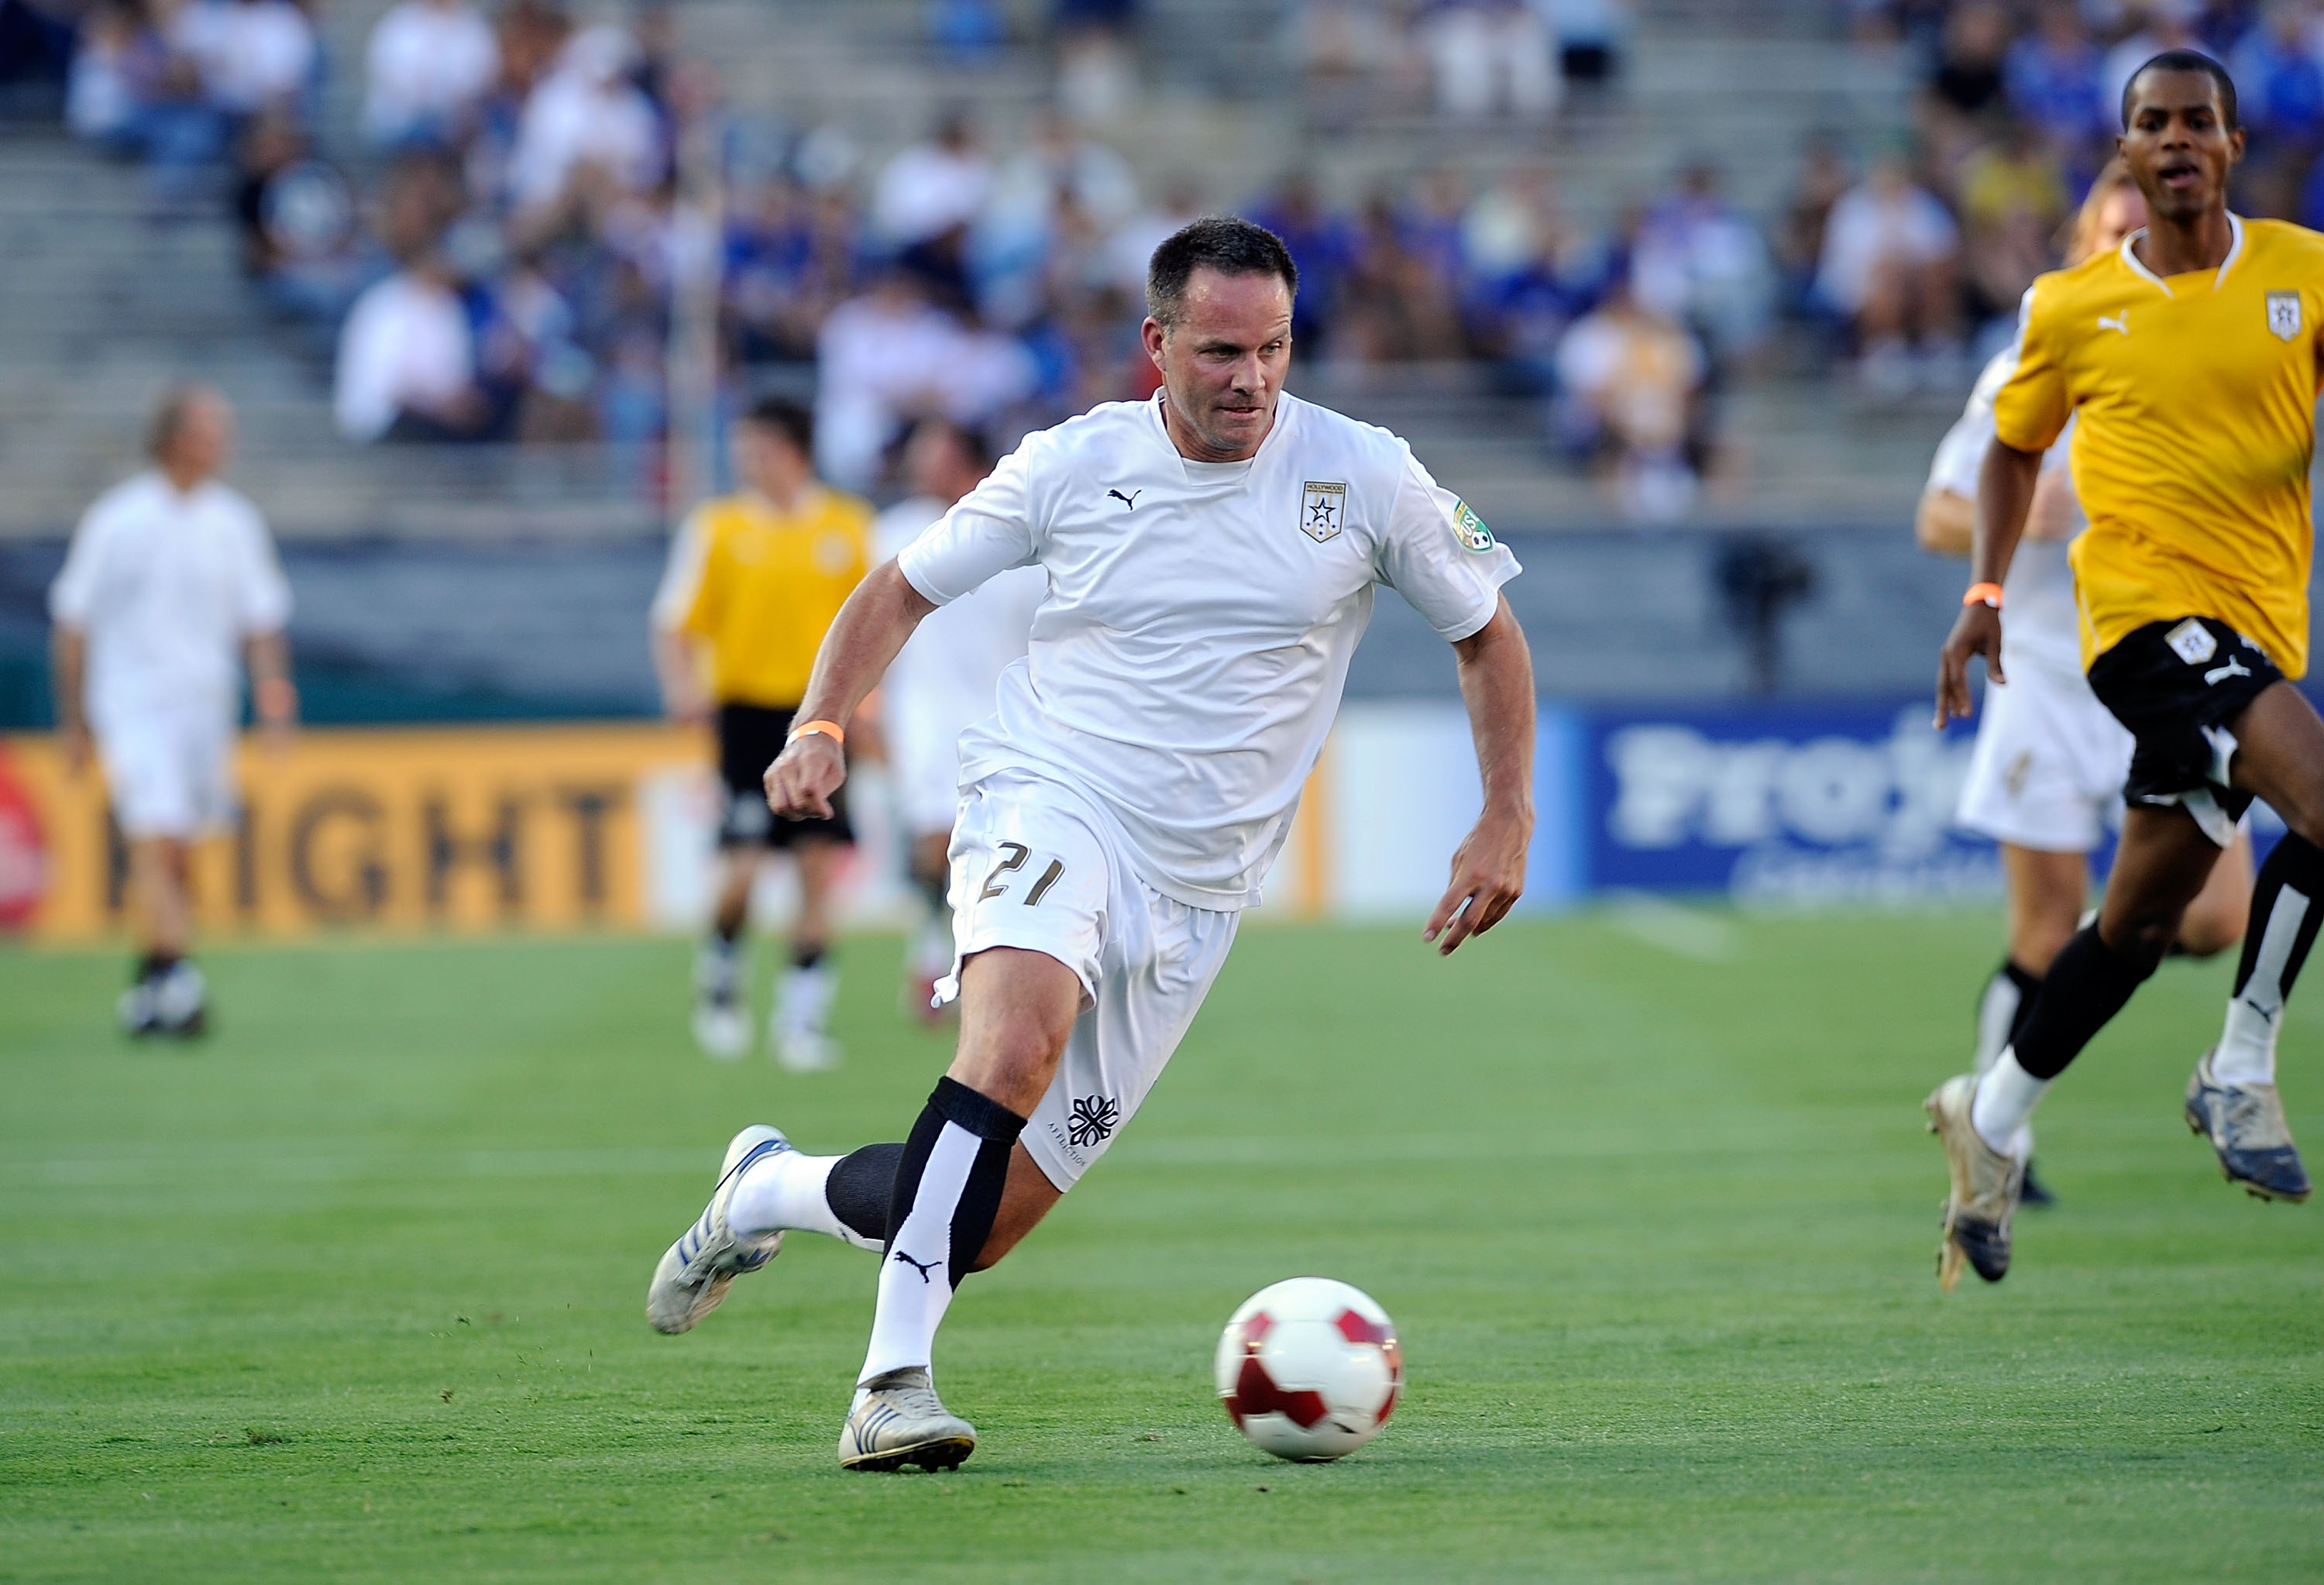 PASADENA, CA - JULY 21:  Former USNational team footballer Eric Wynalda paces the ball on the attack during a soccer celebrity game prior to the World Football Challenge between Chelsea FC and Inter Milan at the Rose Bowl on July 21, 2009 in Pasadena, Cal